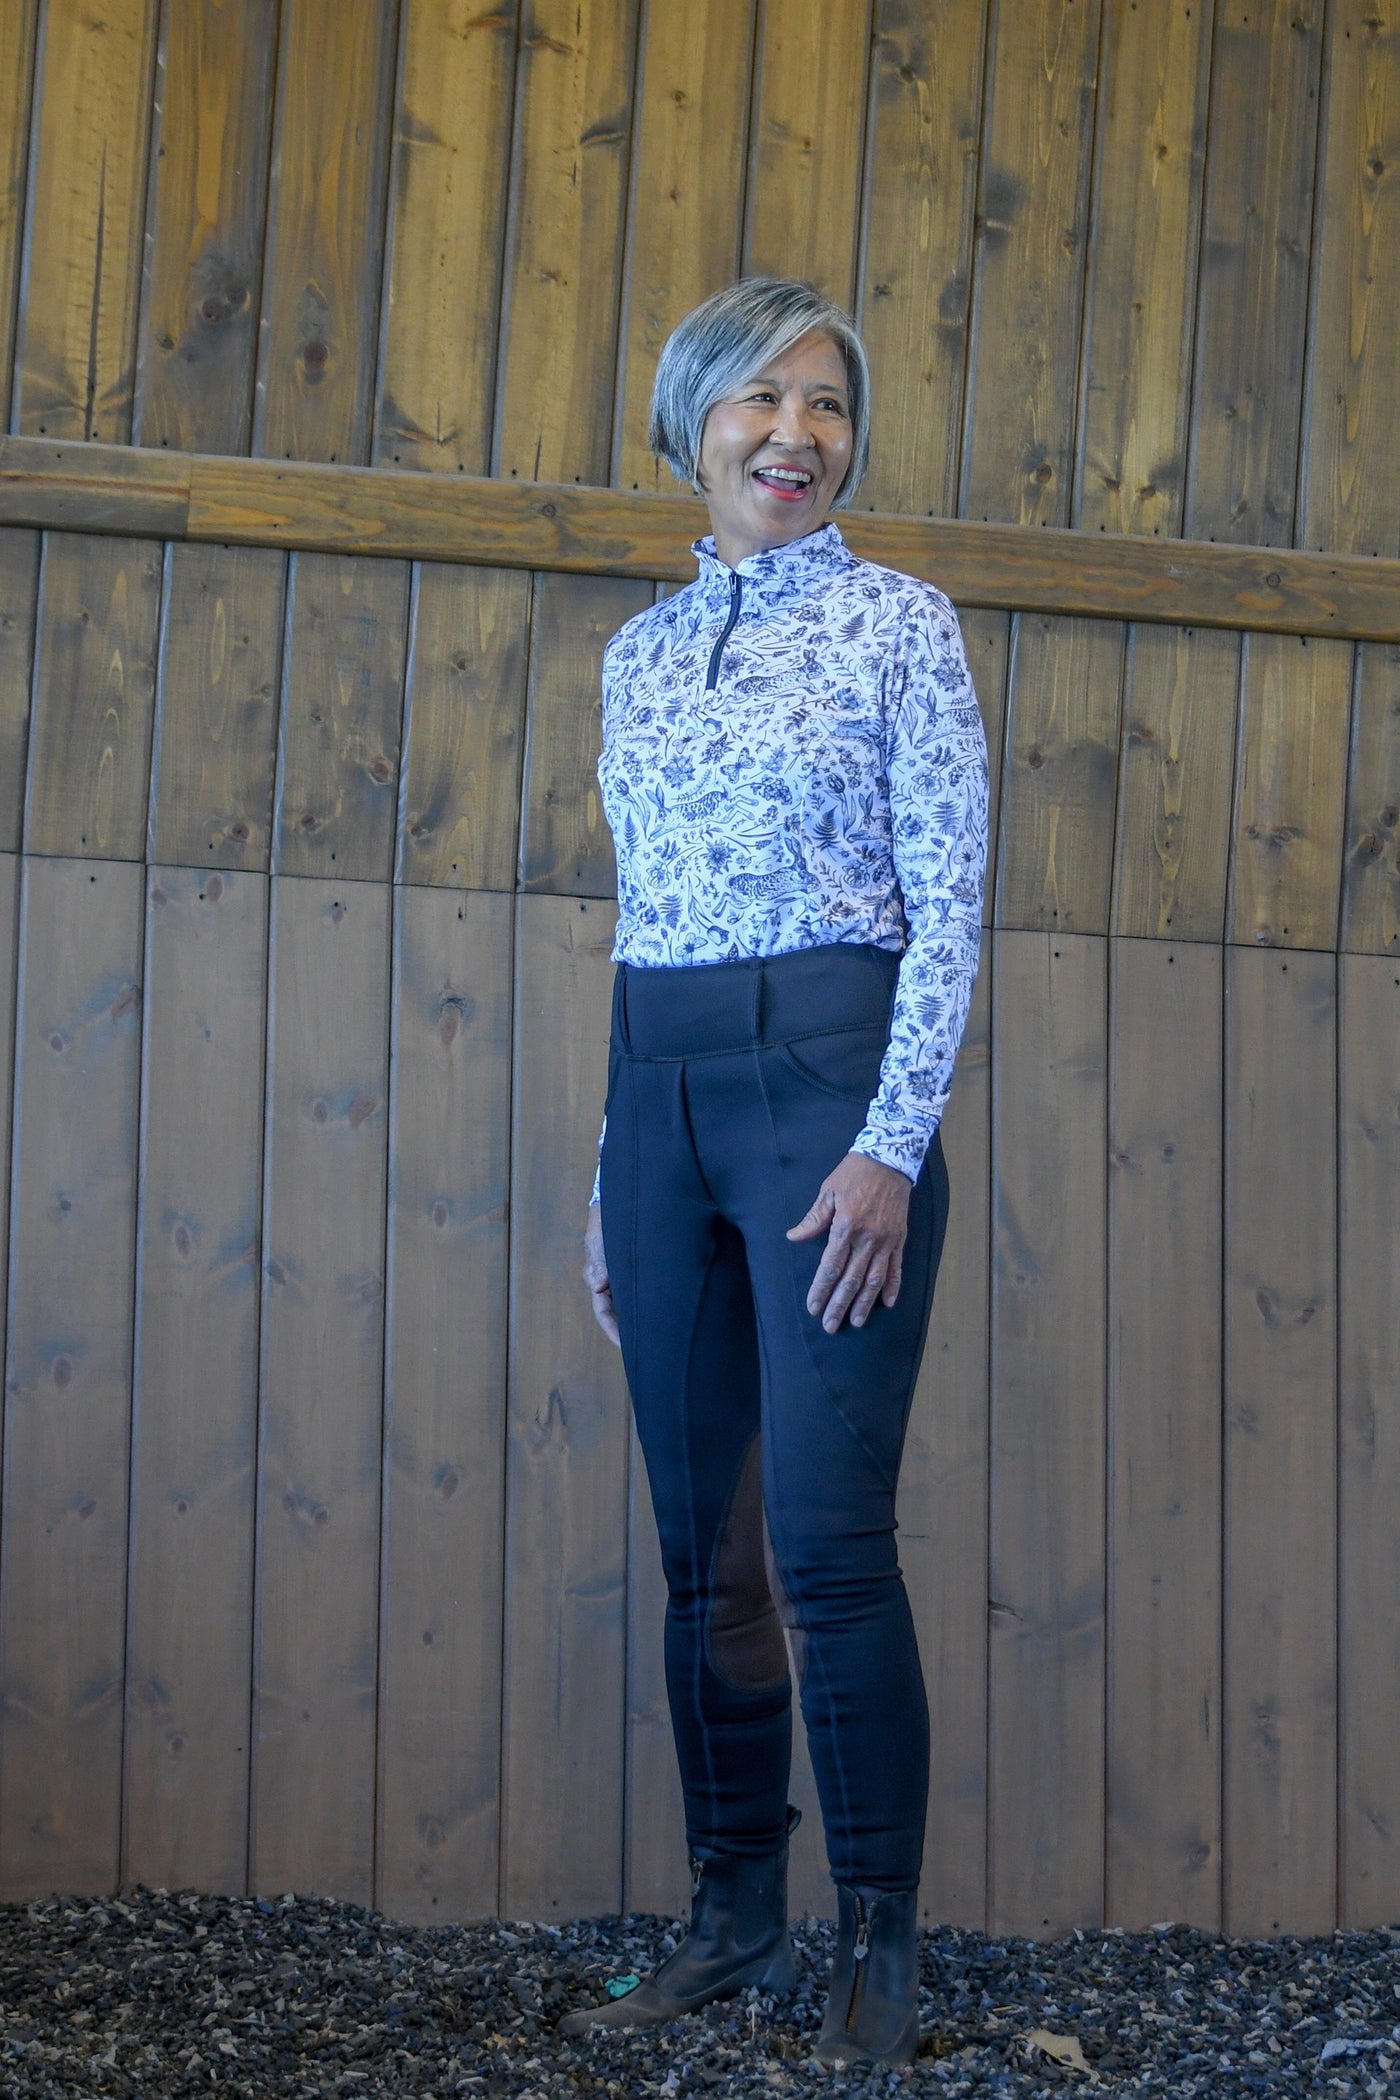 Kindness Knee-Patch Breeches (Classic Black)